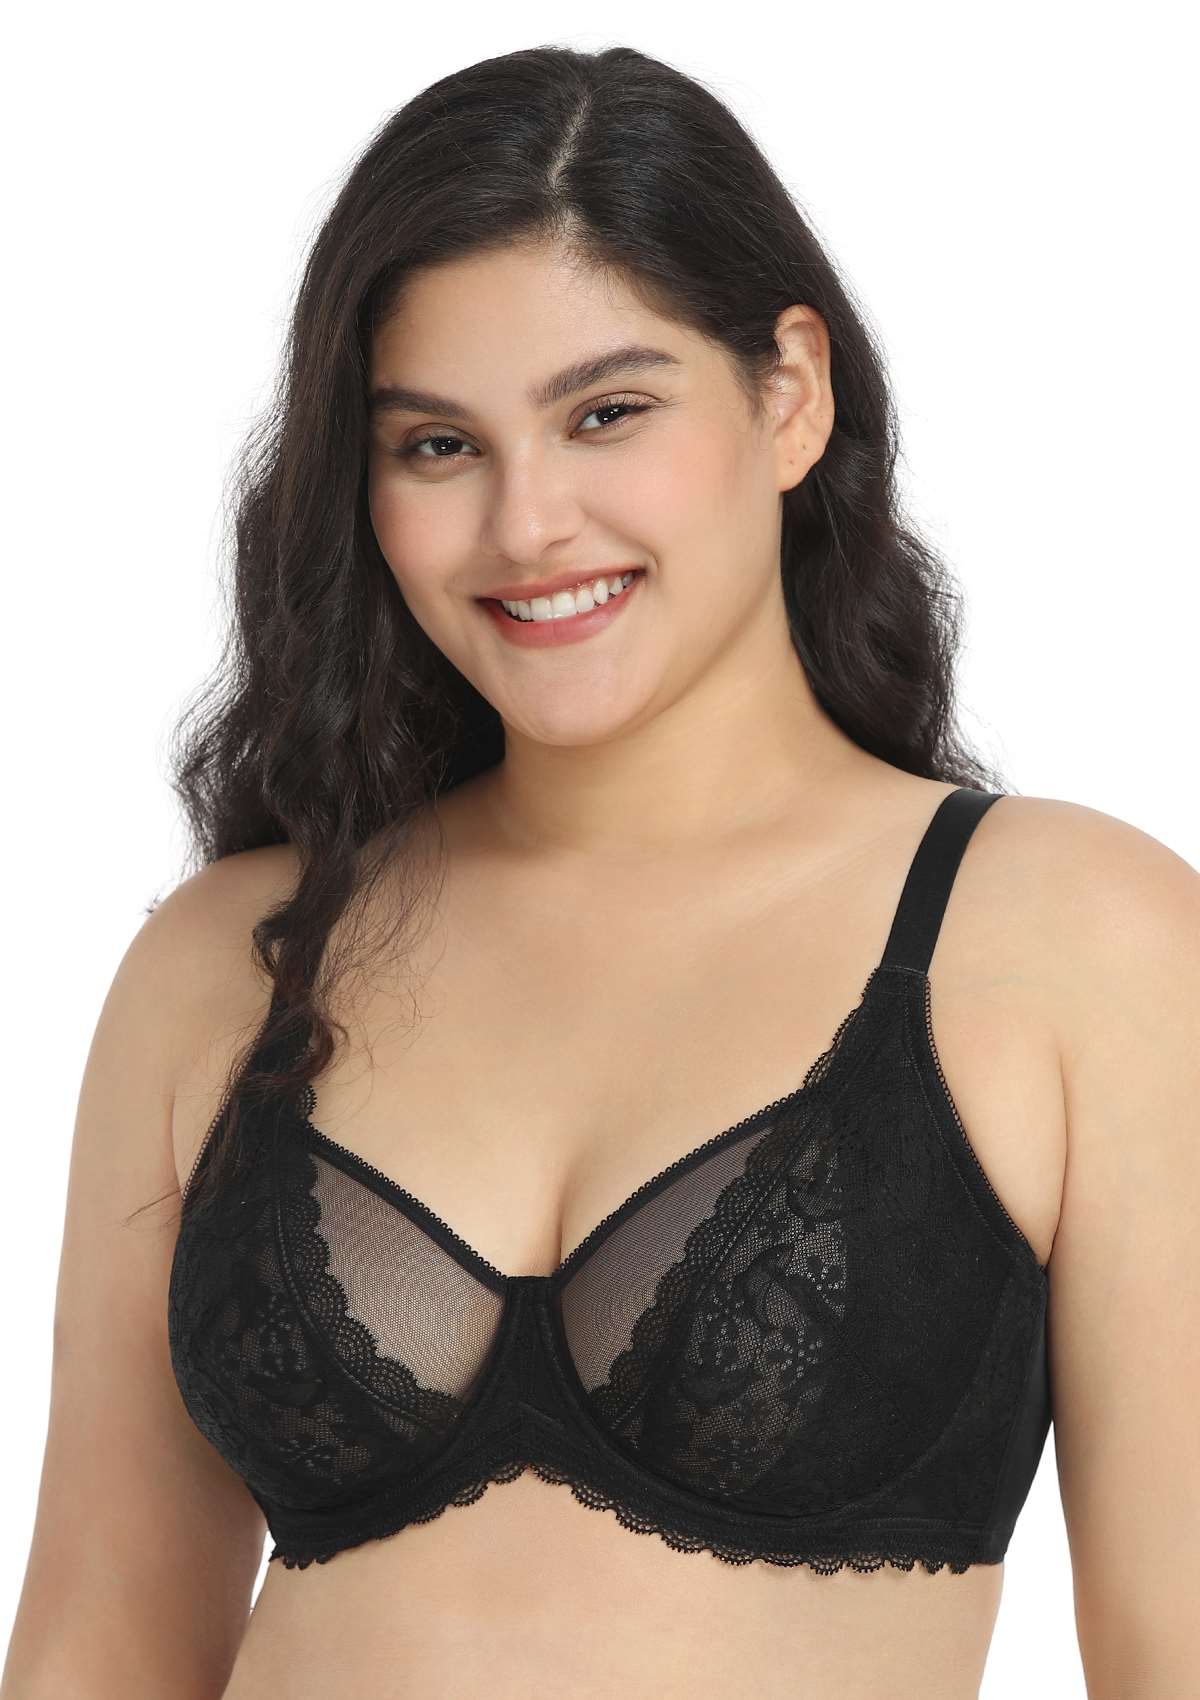 HSIA Anemone Big Bra: Best Bra For Lift And Support, Floral Bra - Black / 40 / D